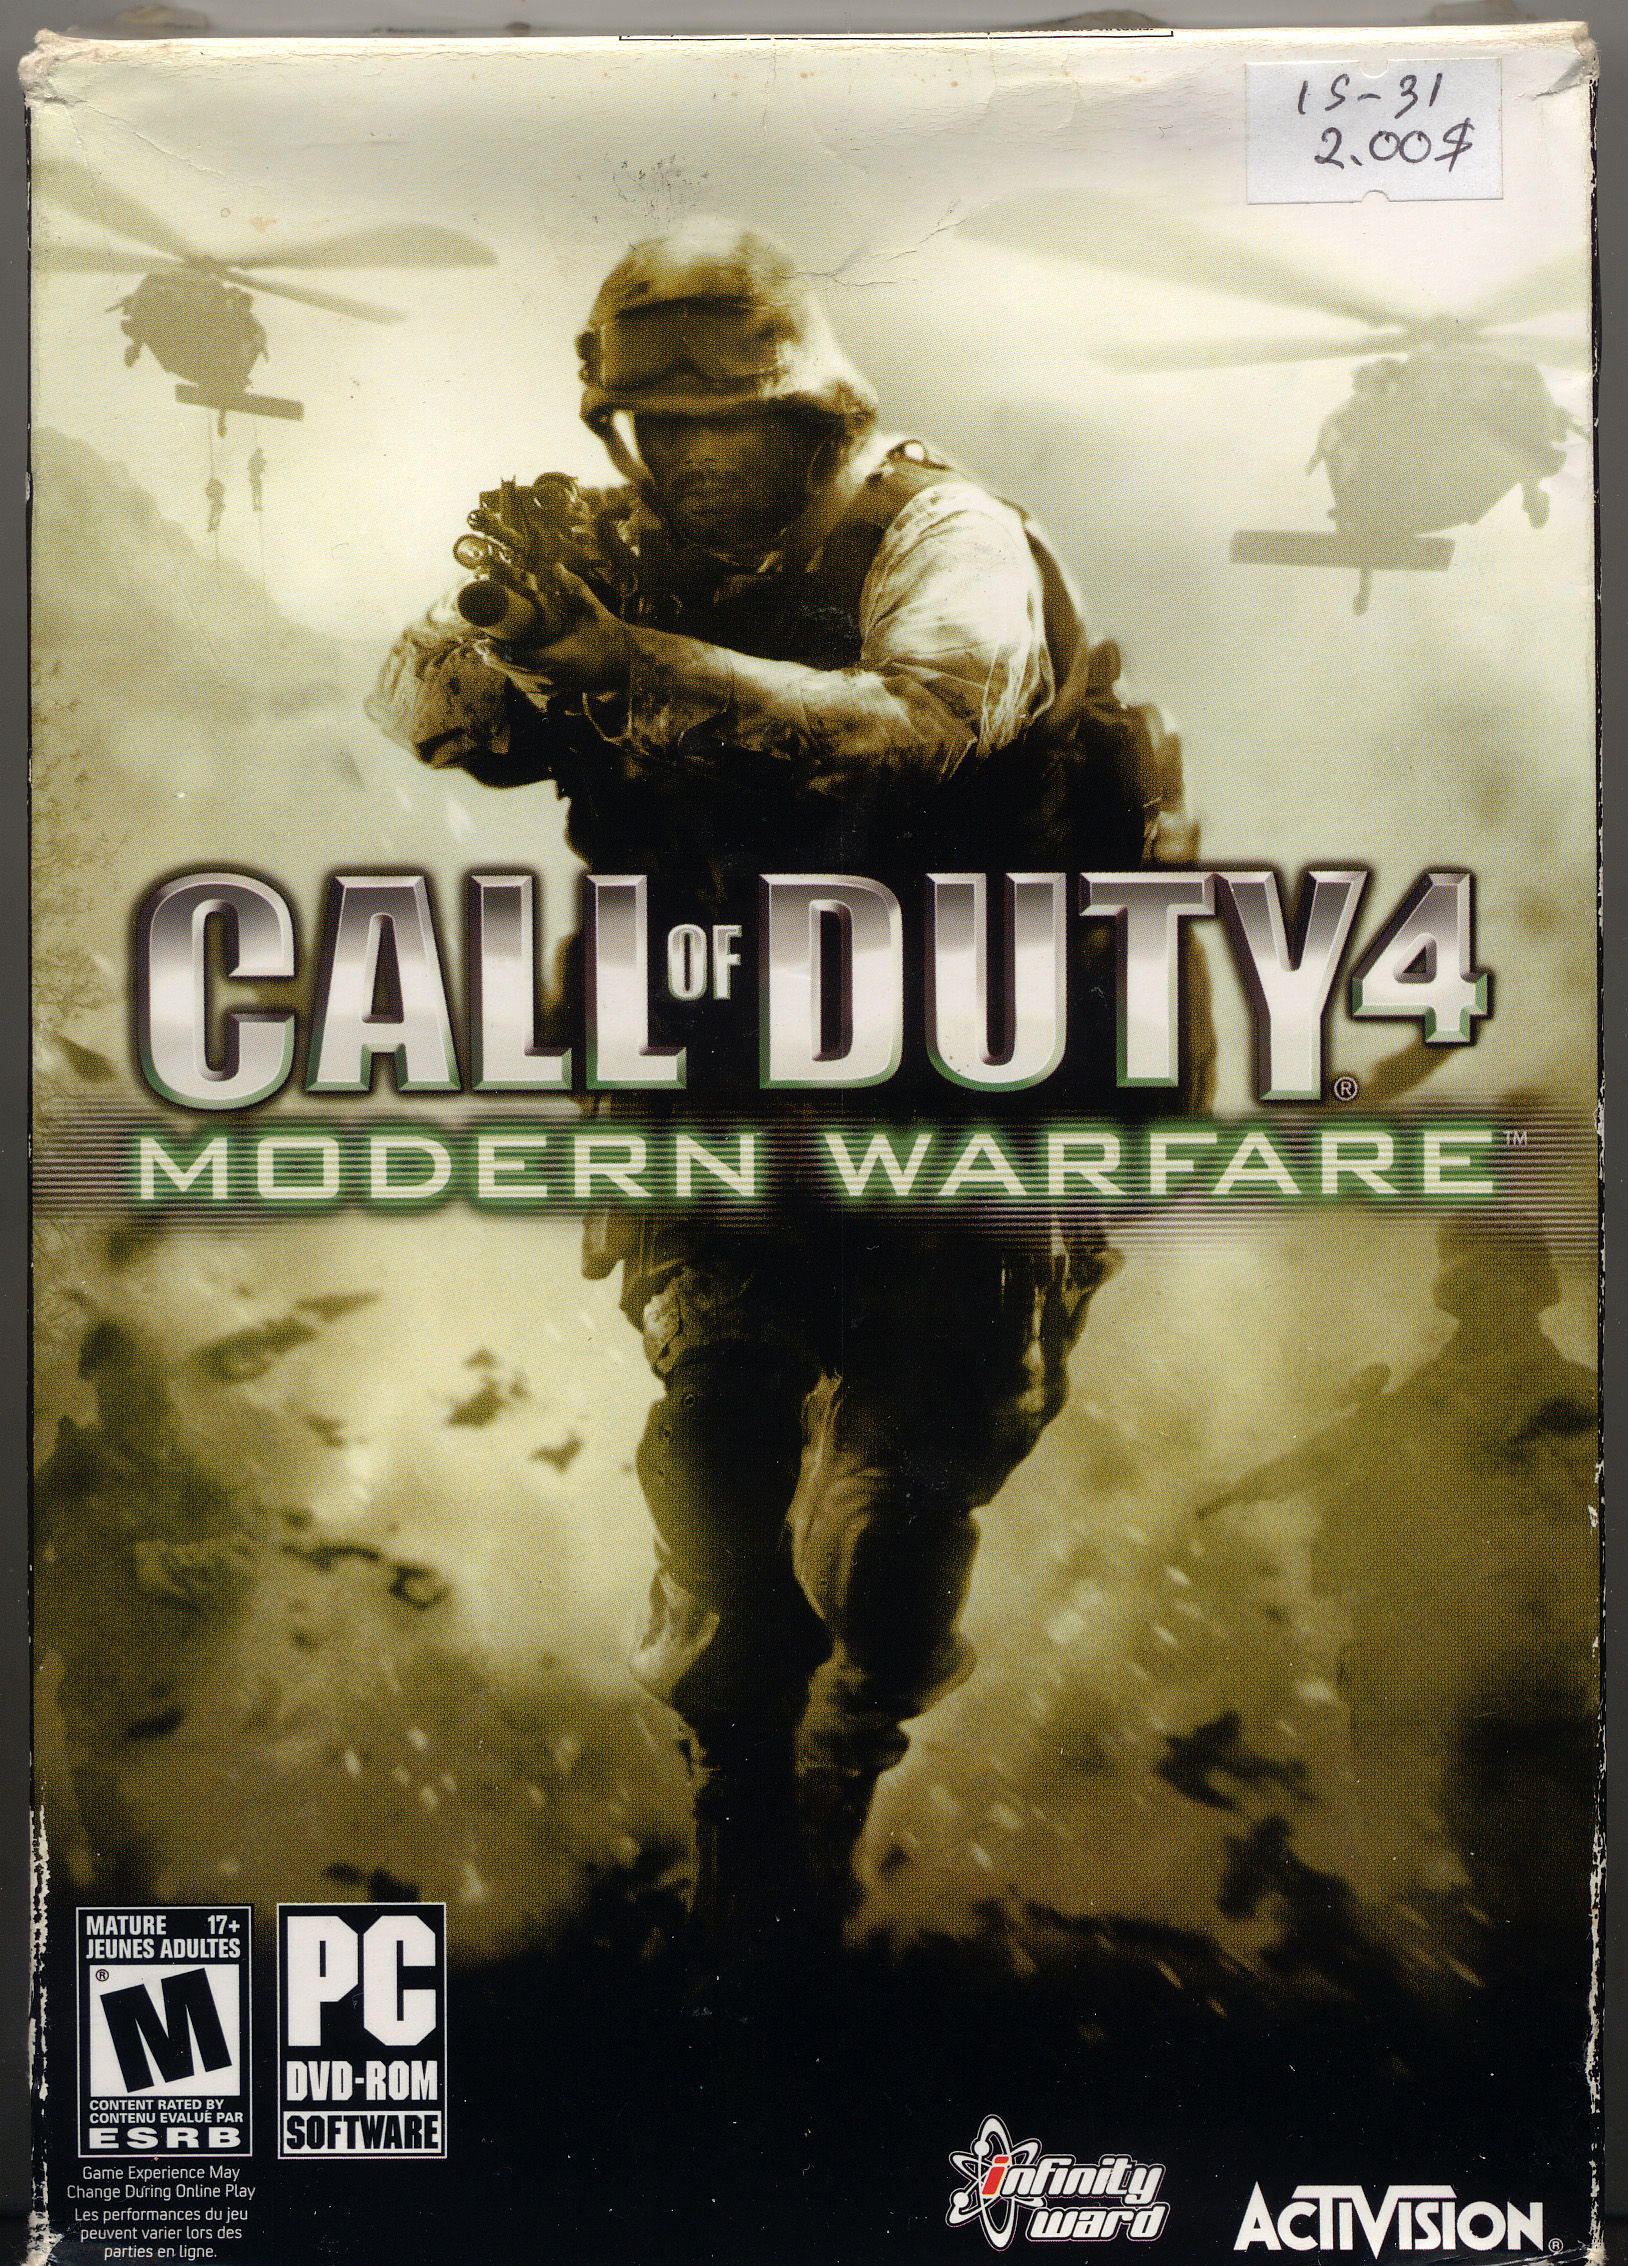 Call of Duty: Modern Warfare - Download for PC Free